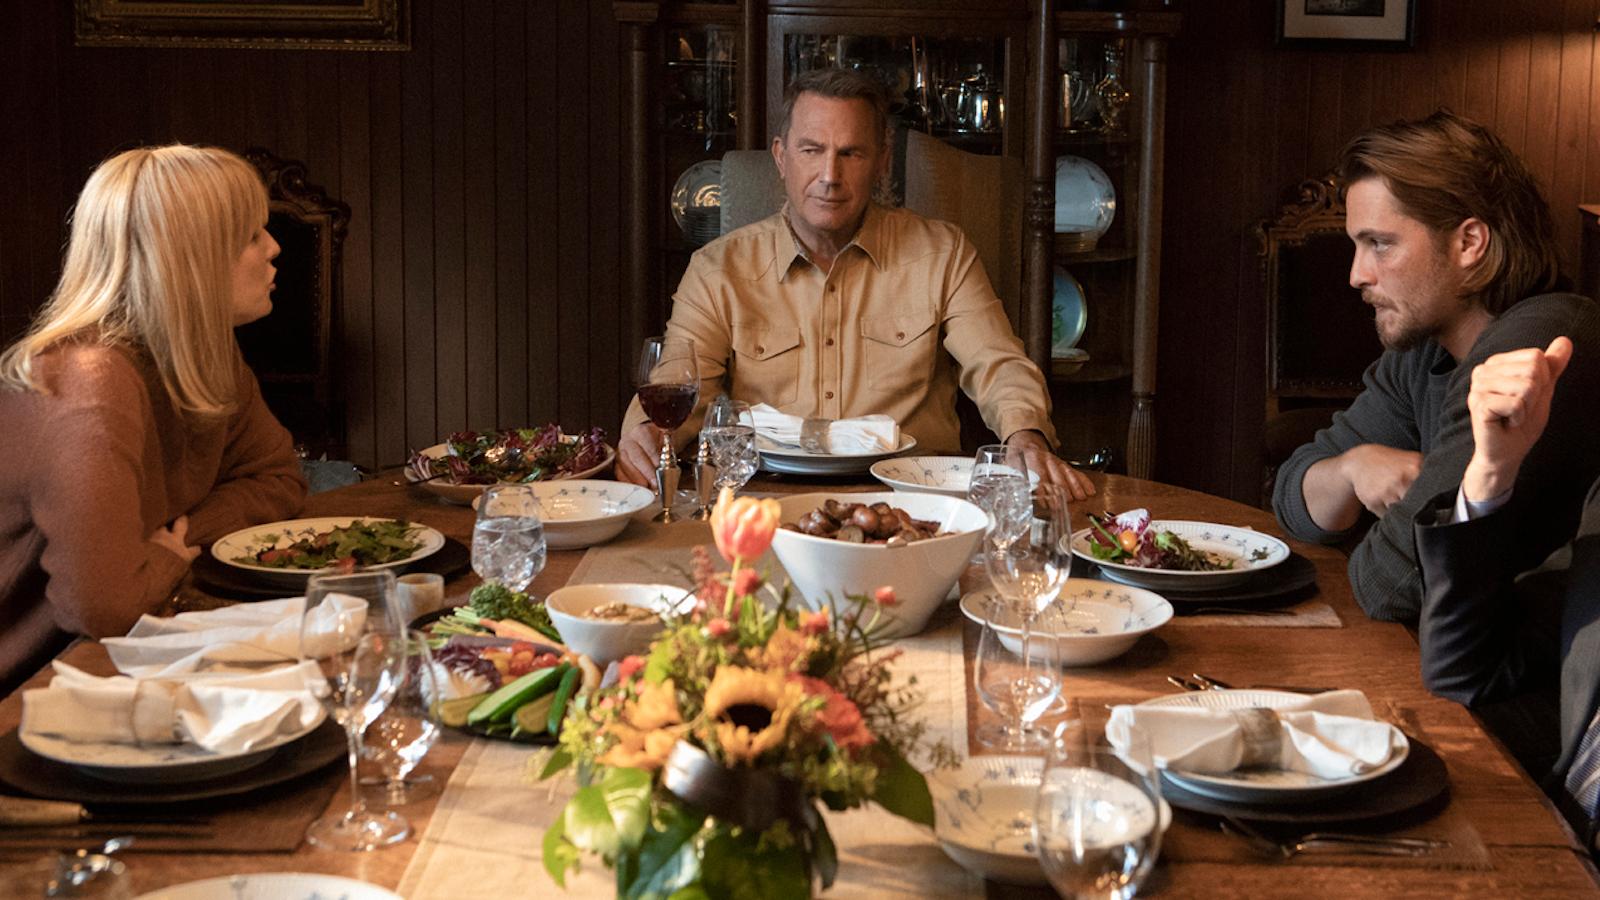 Kelly Reilly, Kevin Costner, and Luke Grimes as Beth, John, and Kayce Dutton